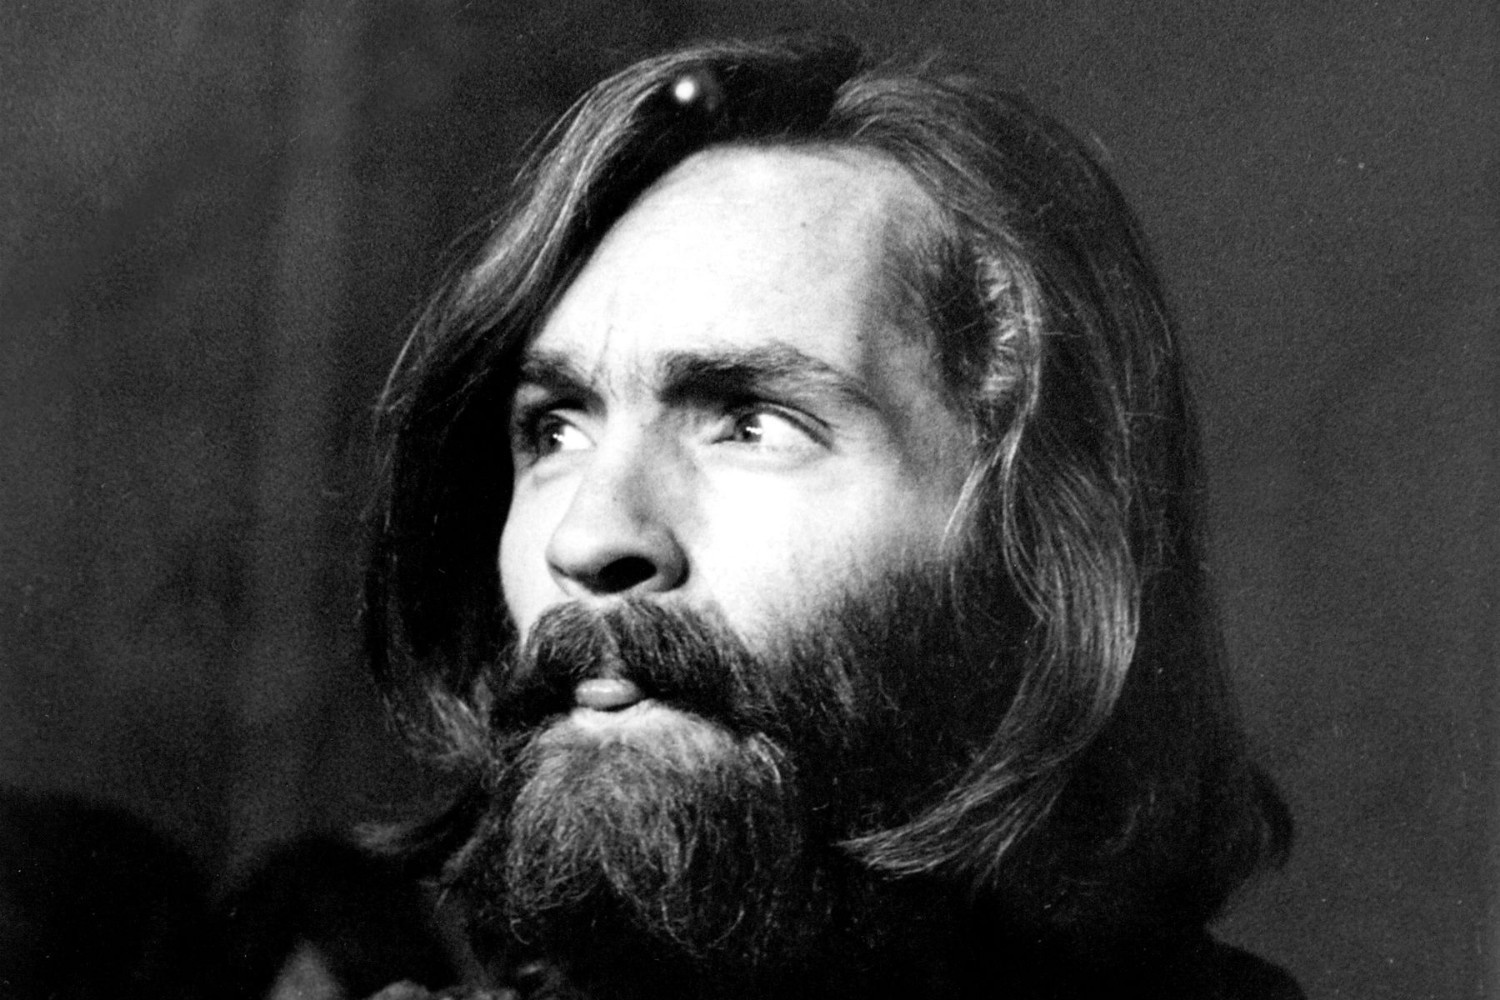 Former cult leader and criminal Charles Manson was sold to a woman that wanted children for a pitcher of beer by his own mother. His uncle had to find and retrieve him.